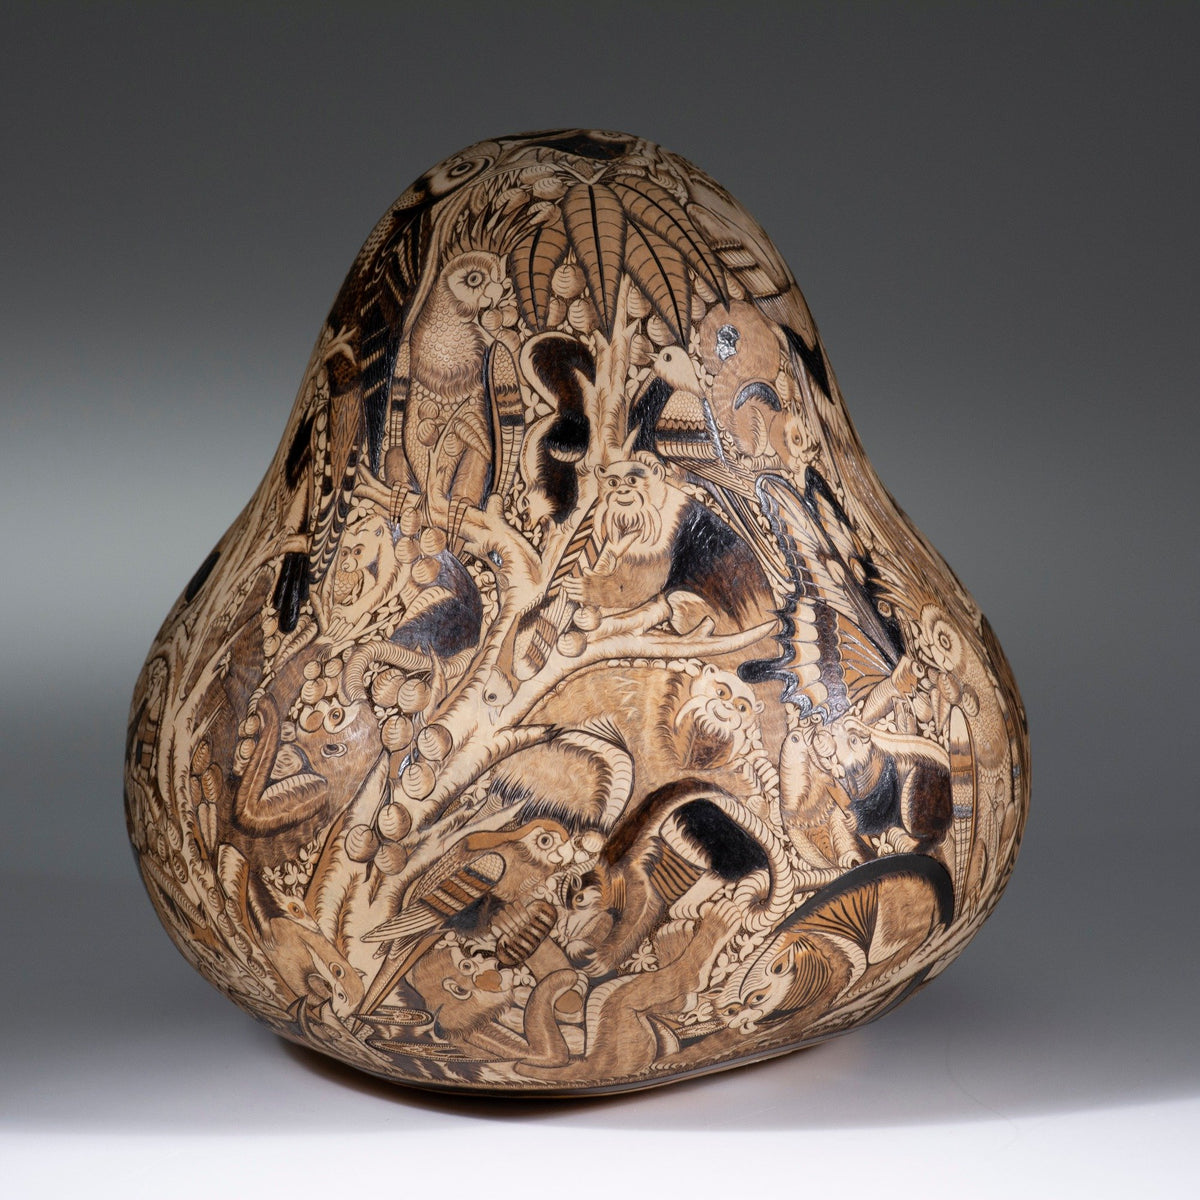 Amazon Jungle - finely carved gourd art